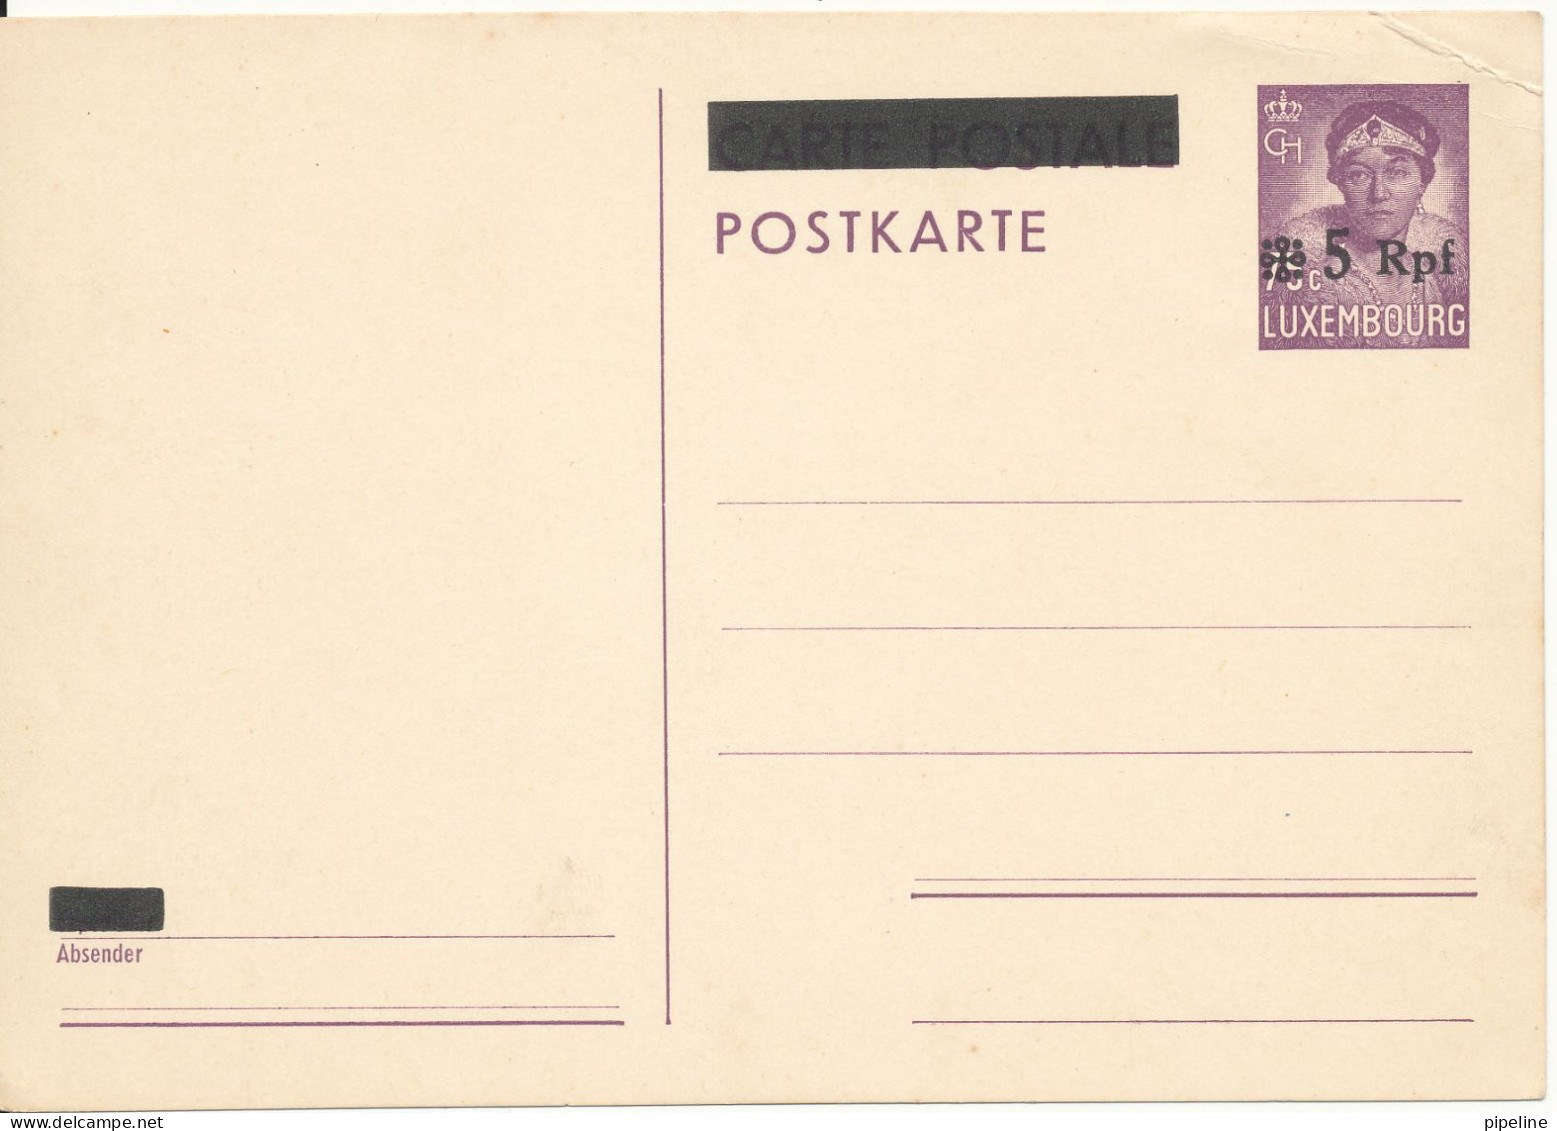 Luxembourg Postal Stationery Postcard Overprinted In Mint Condition (a Weak Corner Of The Card) - Entiers Postaux